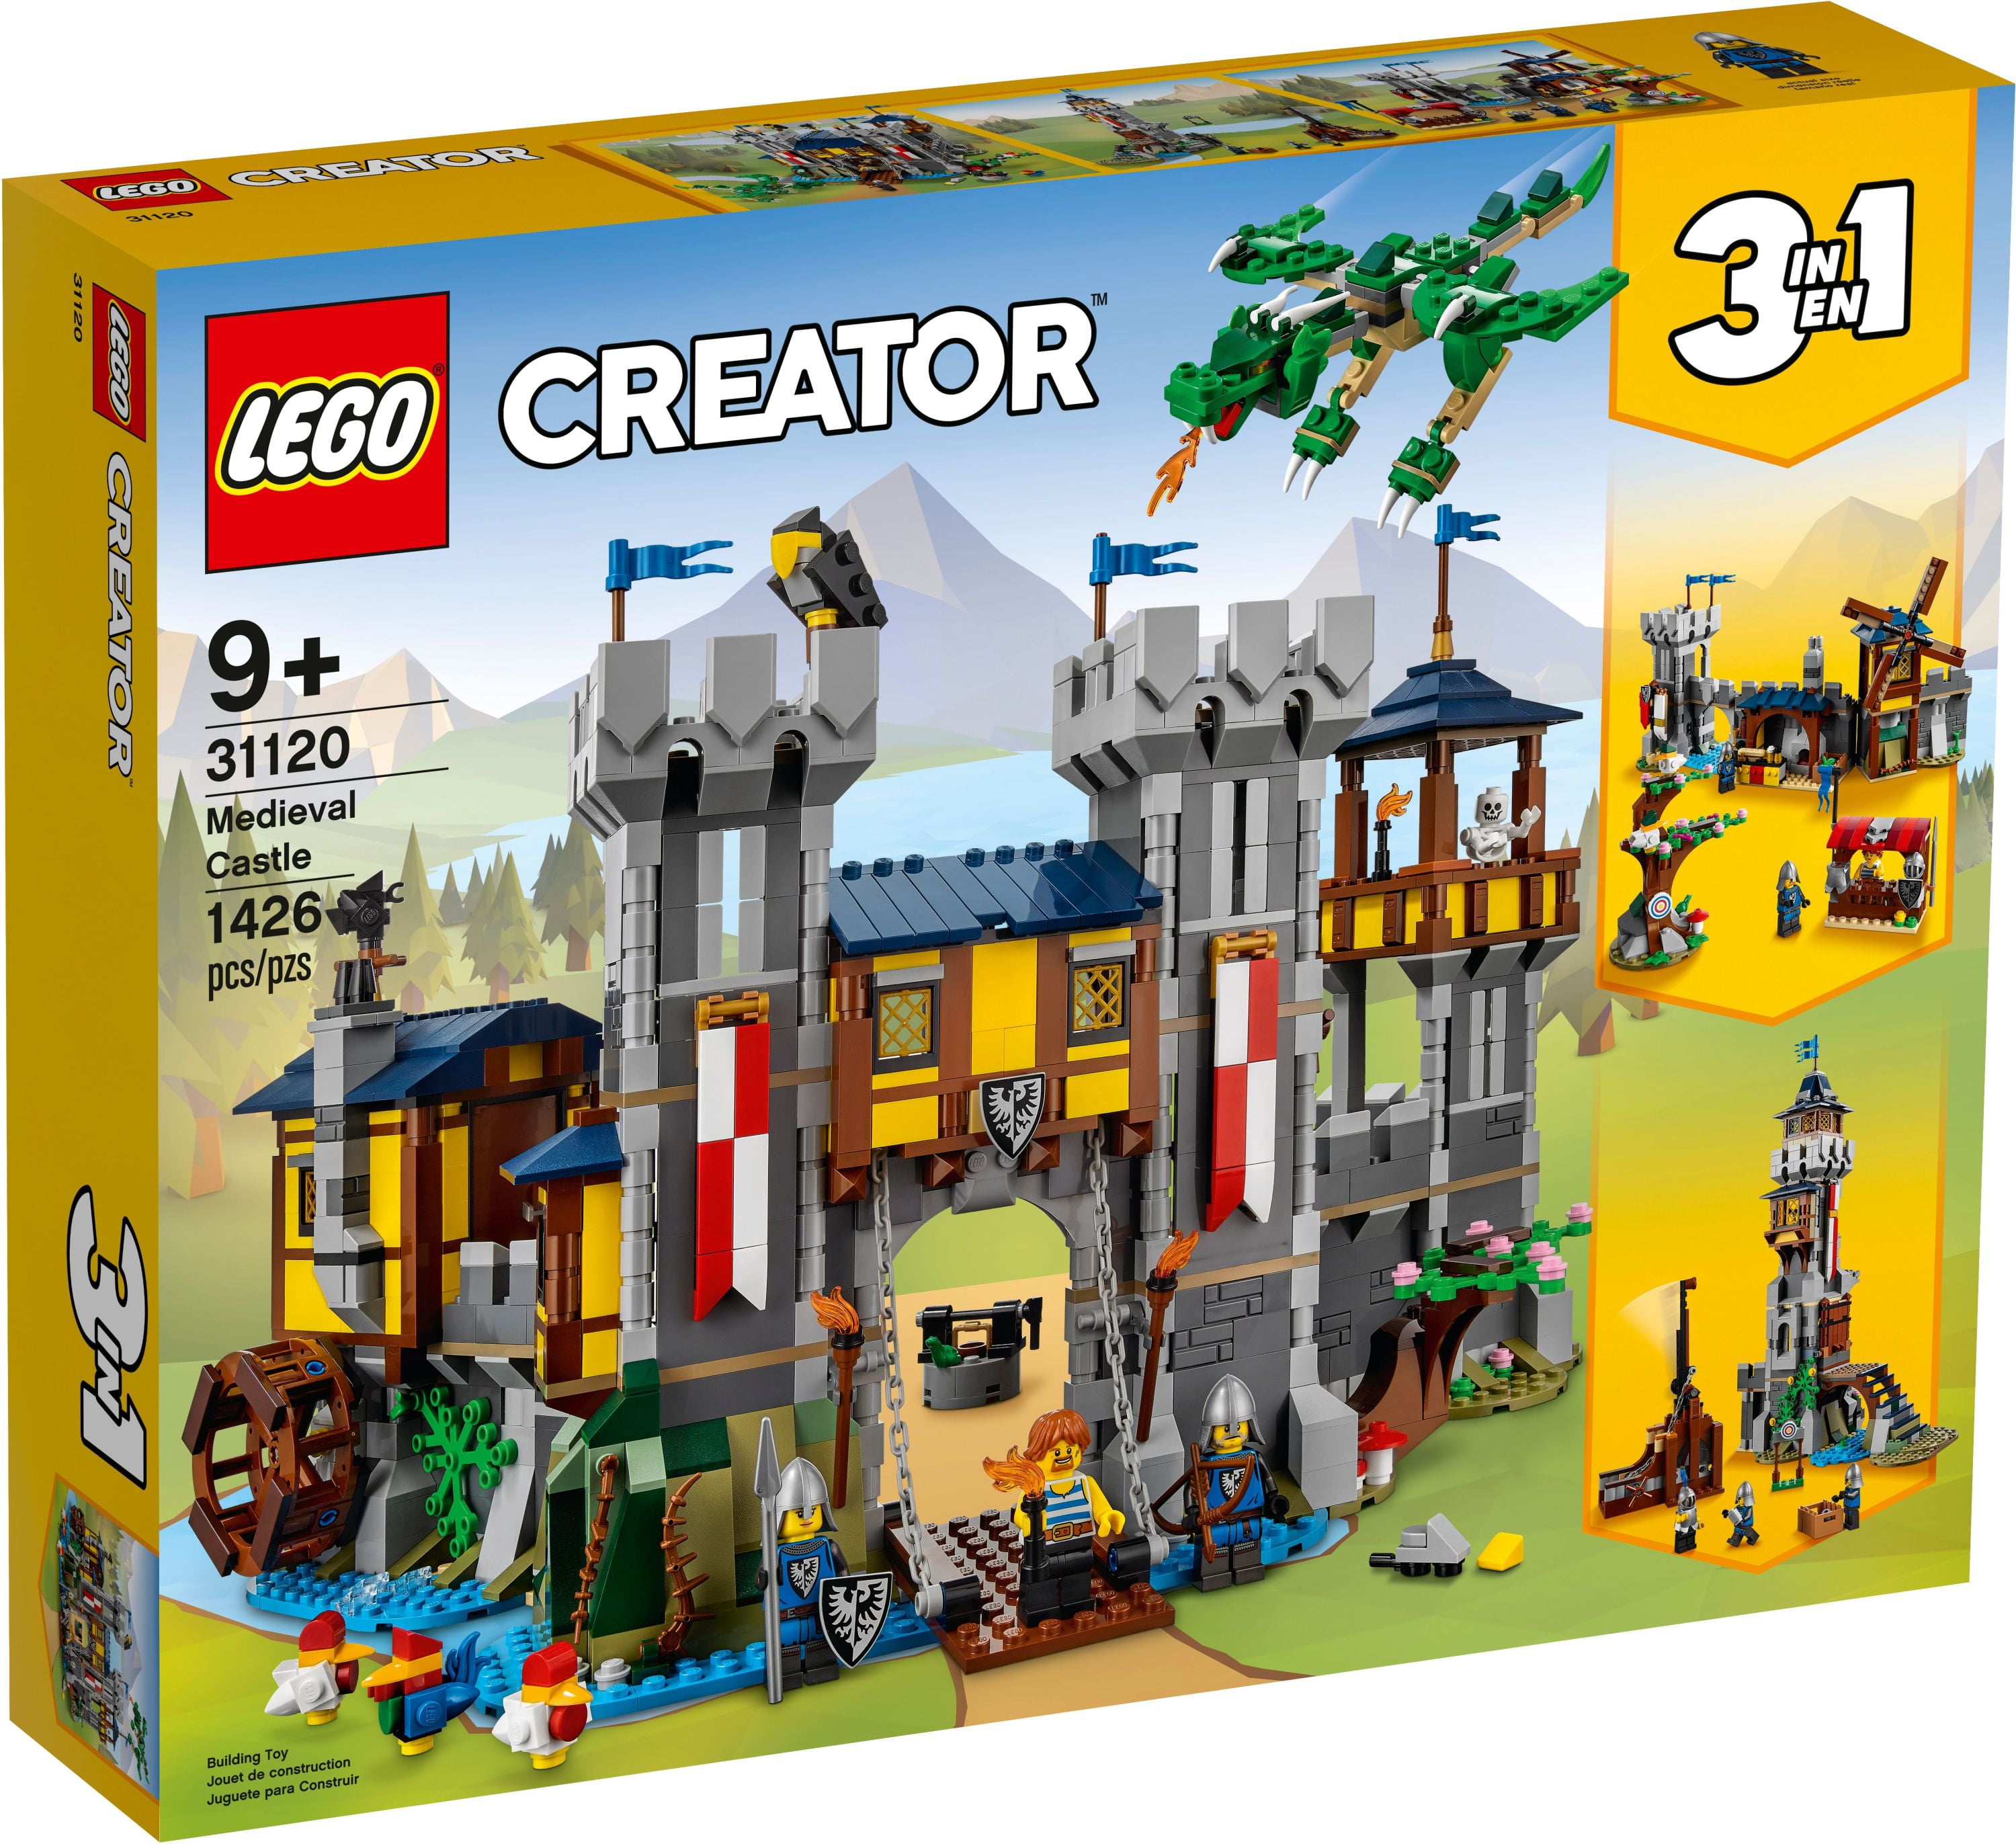 LEGO Creator 3in1 Castle Toy to Tower or Marketplace 31120, Skeleton, Dragon Figure, Minifigures and Catapult - Walmart.com